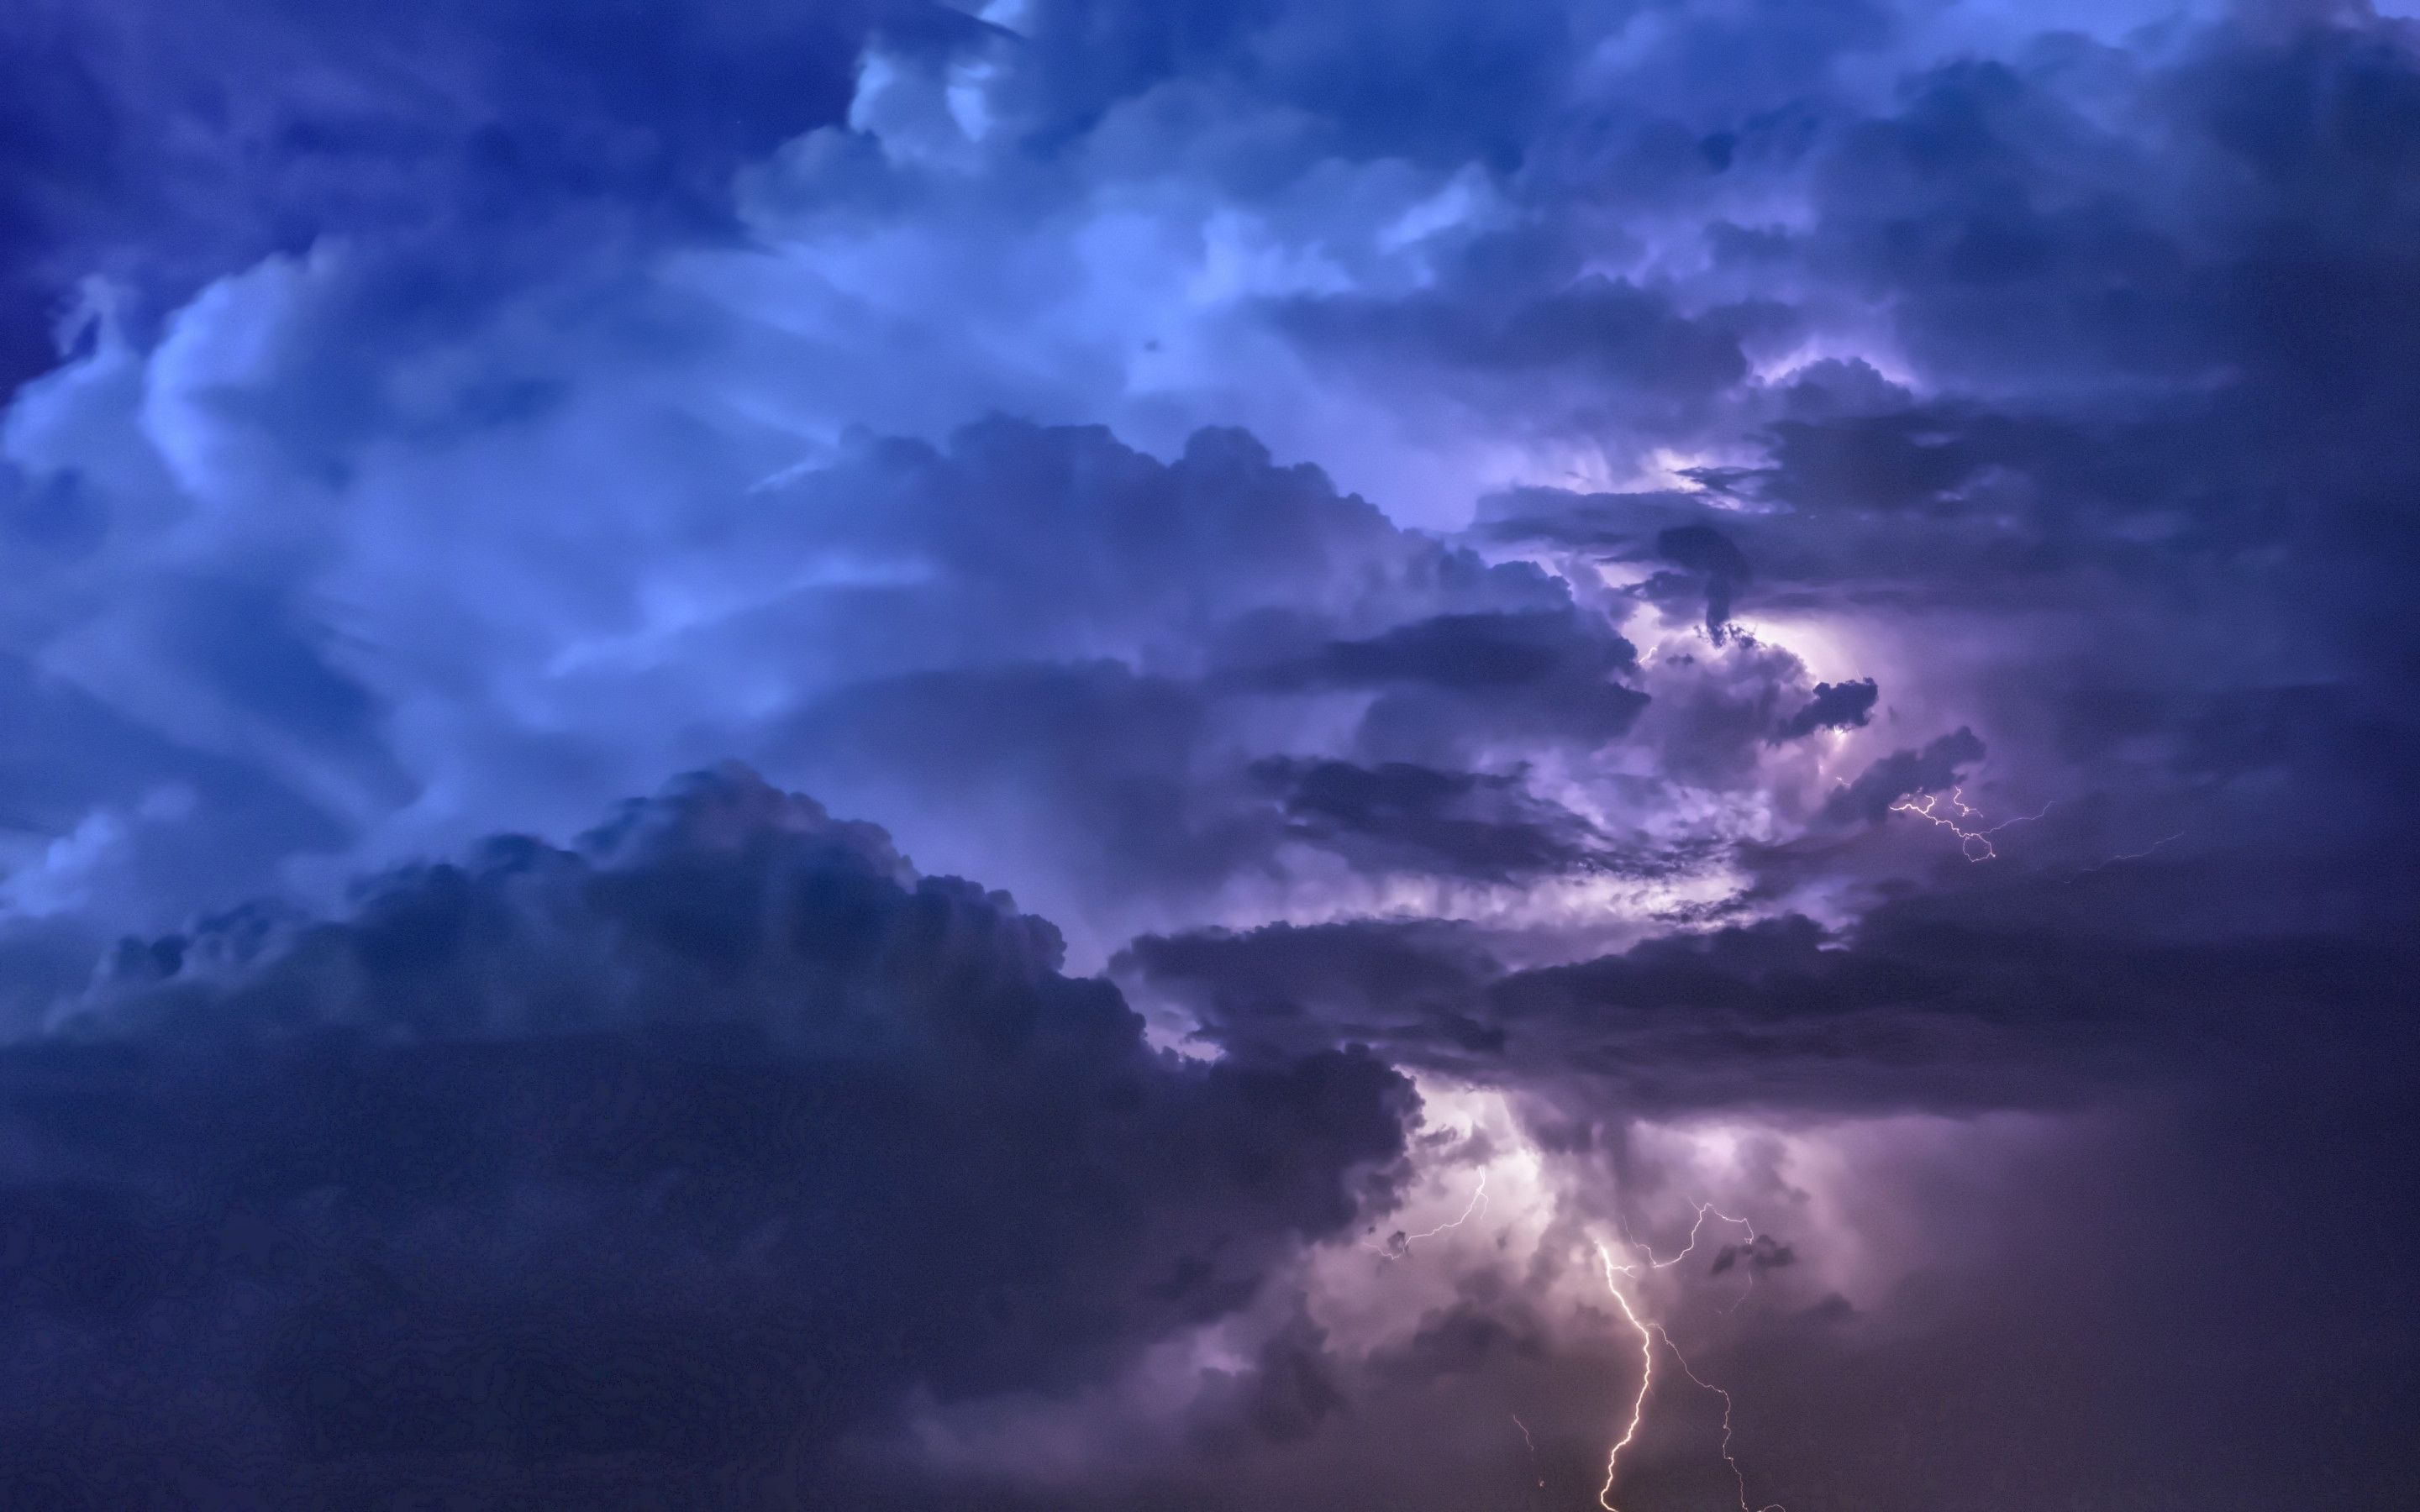 Download wallpaper: Thunders and lightnings 2880x1800